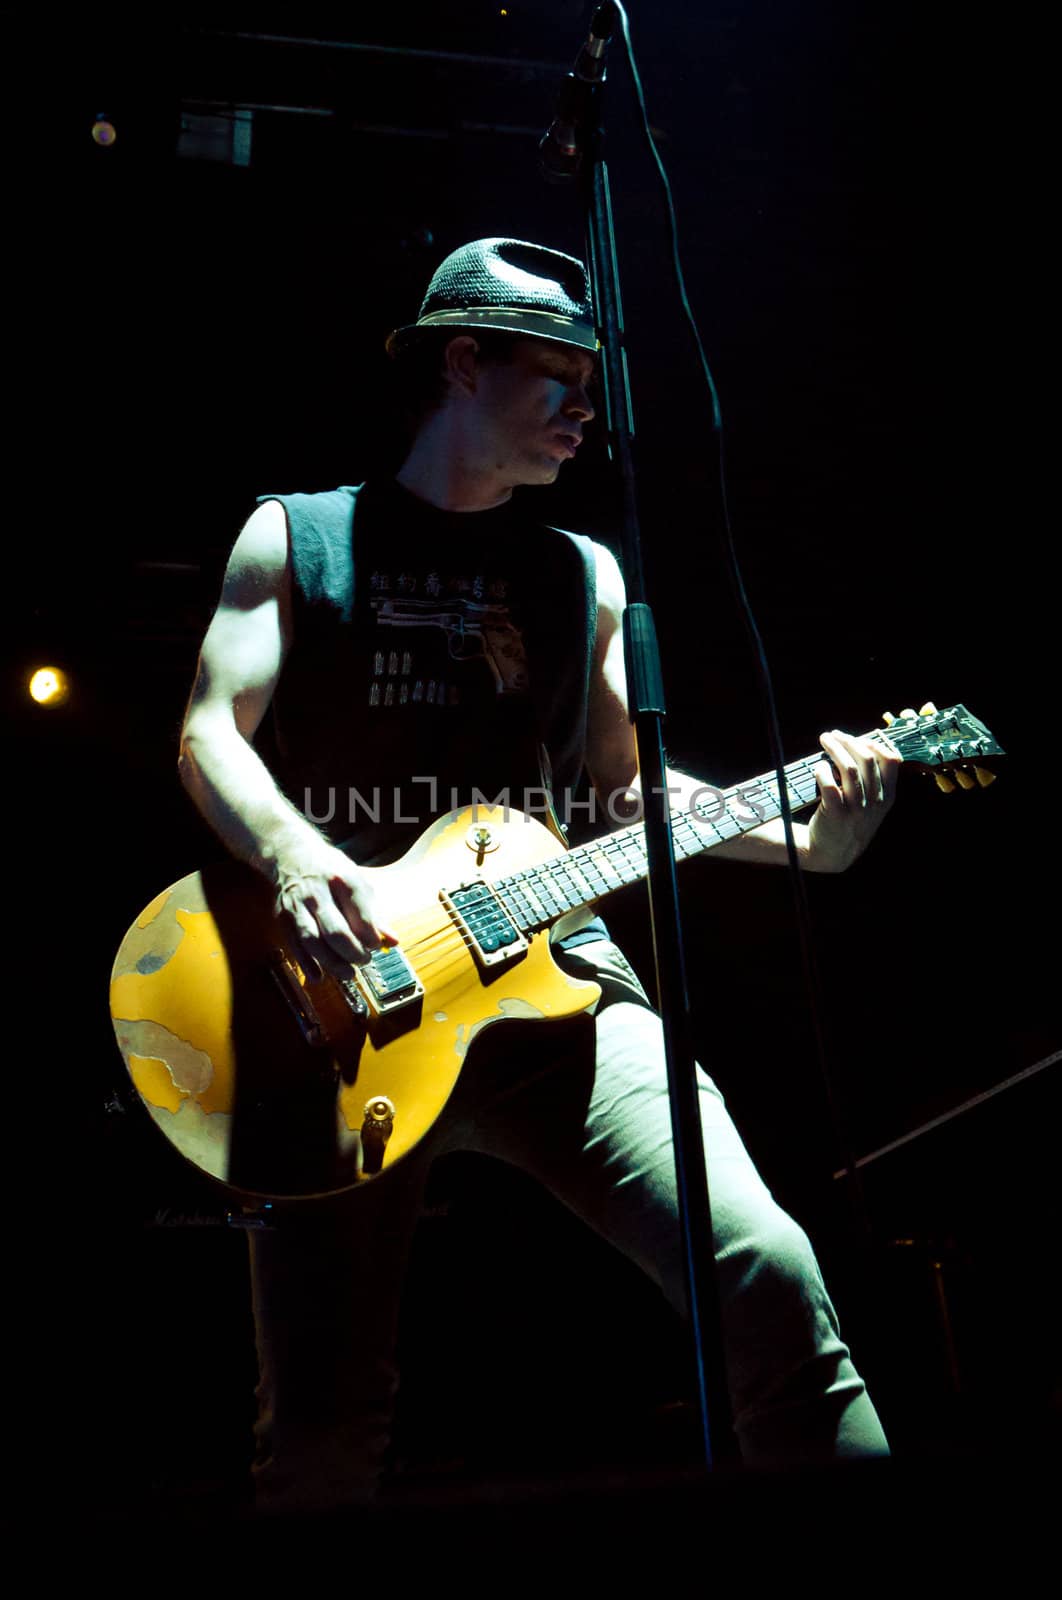 Tom Thacker. Sum 41 concert at Arena Moscow. 
Jul 25, 2012 - Arena Moscow, Moscow, Russia